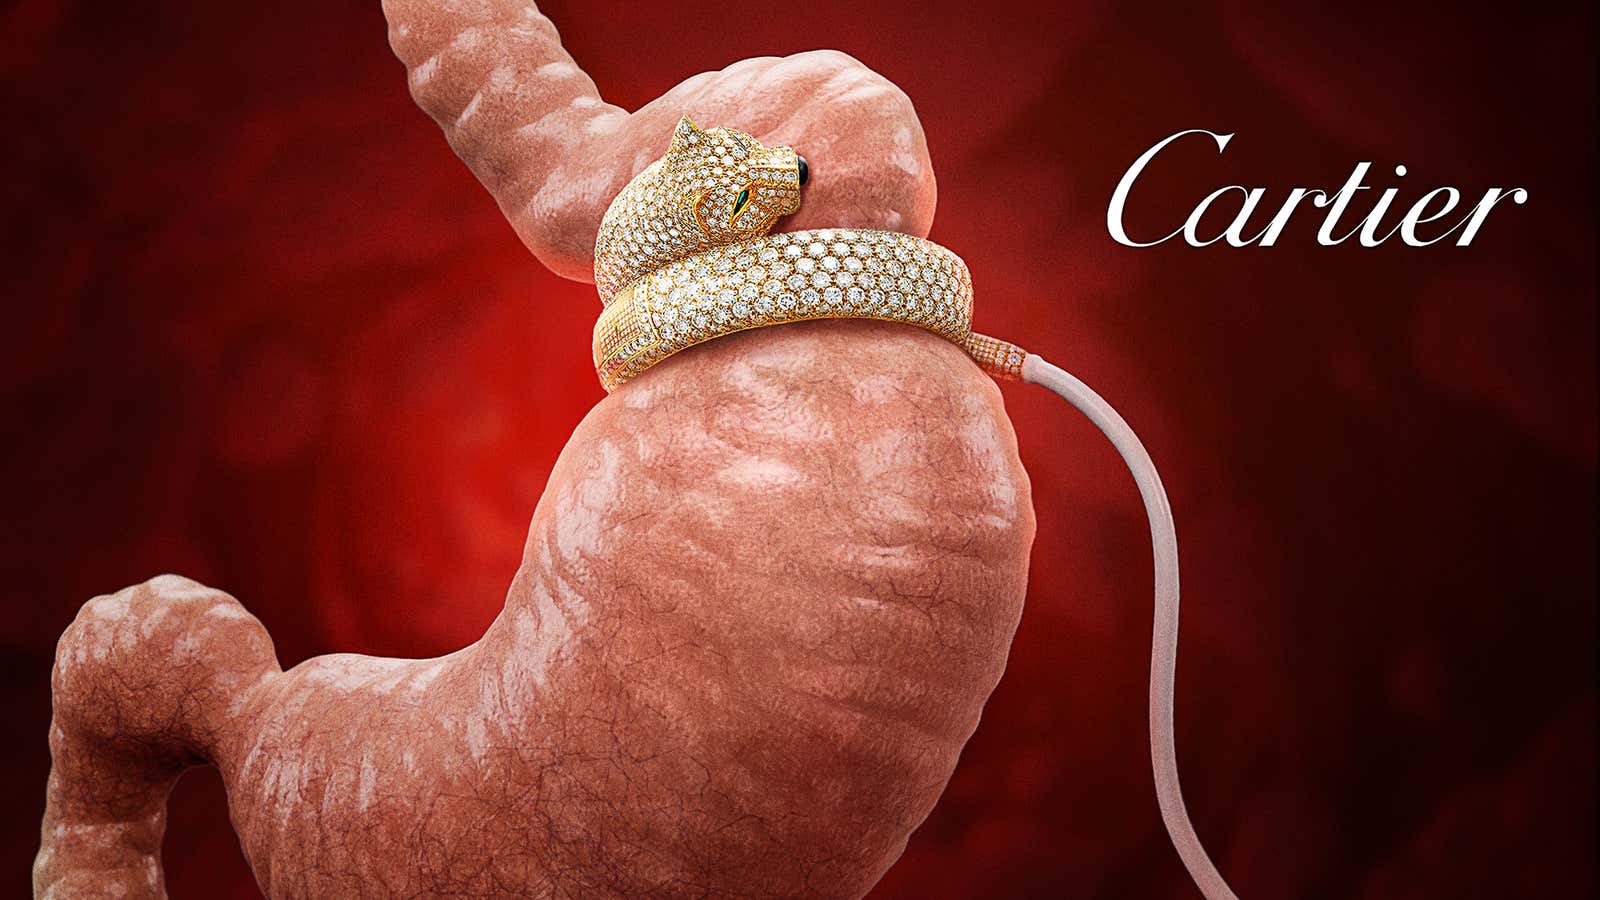 Image for Cartier Introduces New Diamond-Encrusted Gastric Lap-Band